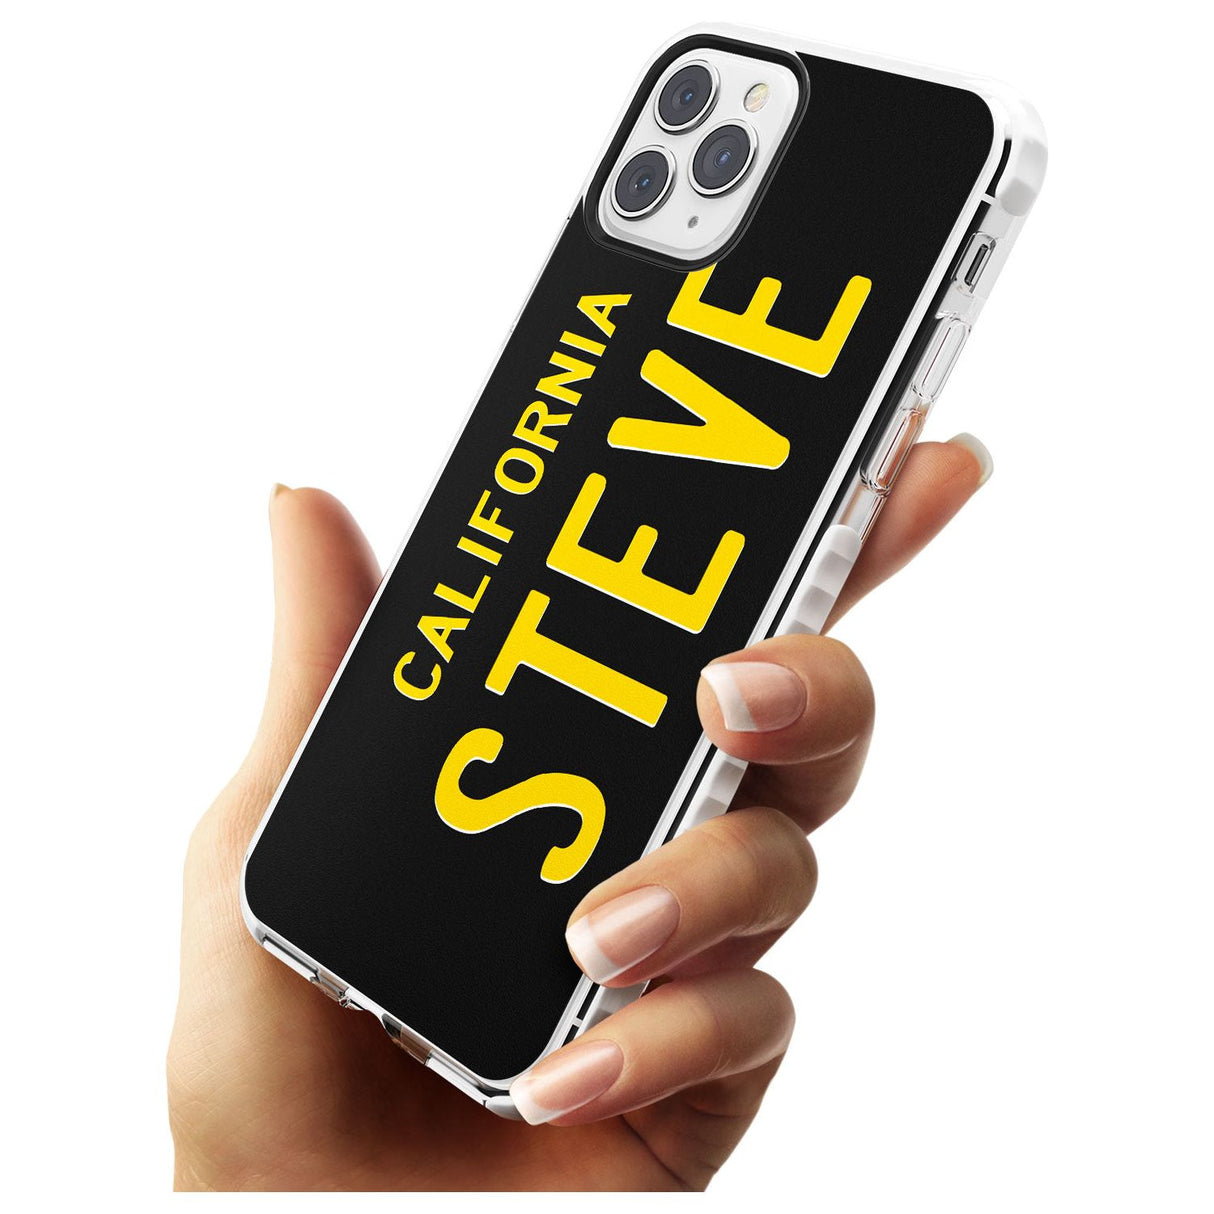 Vintage California License Plate Slim TPU Phone Case for iPhone 11 Pro Max